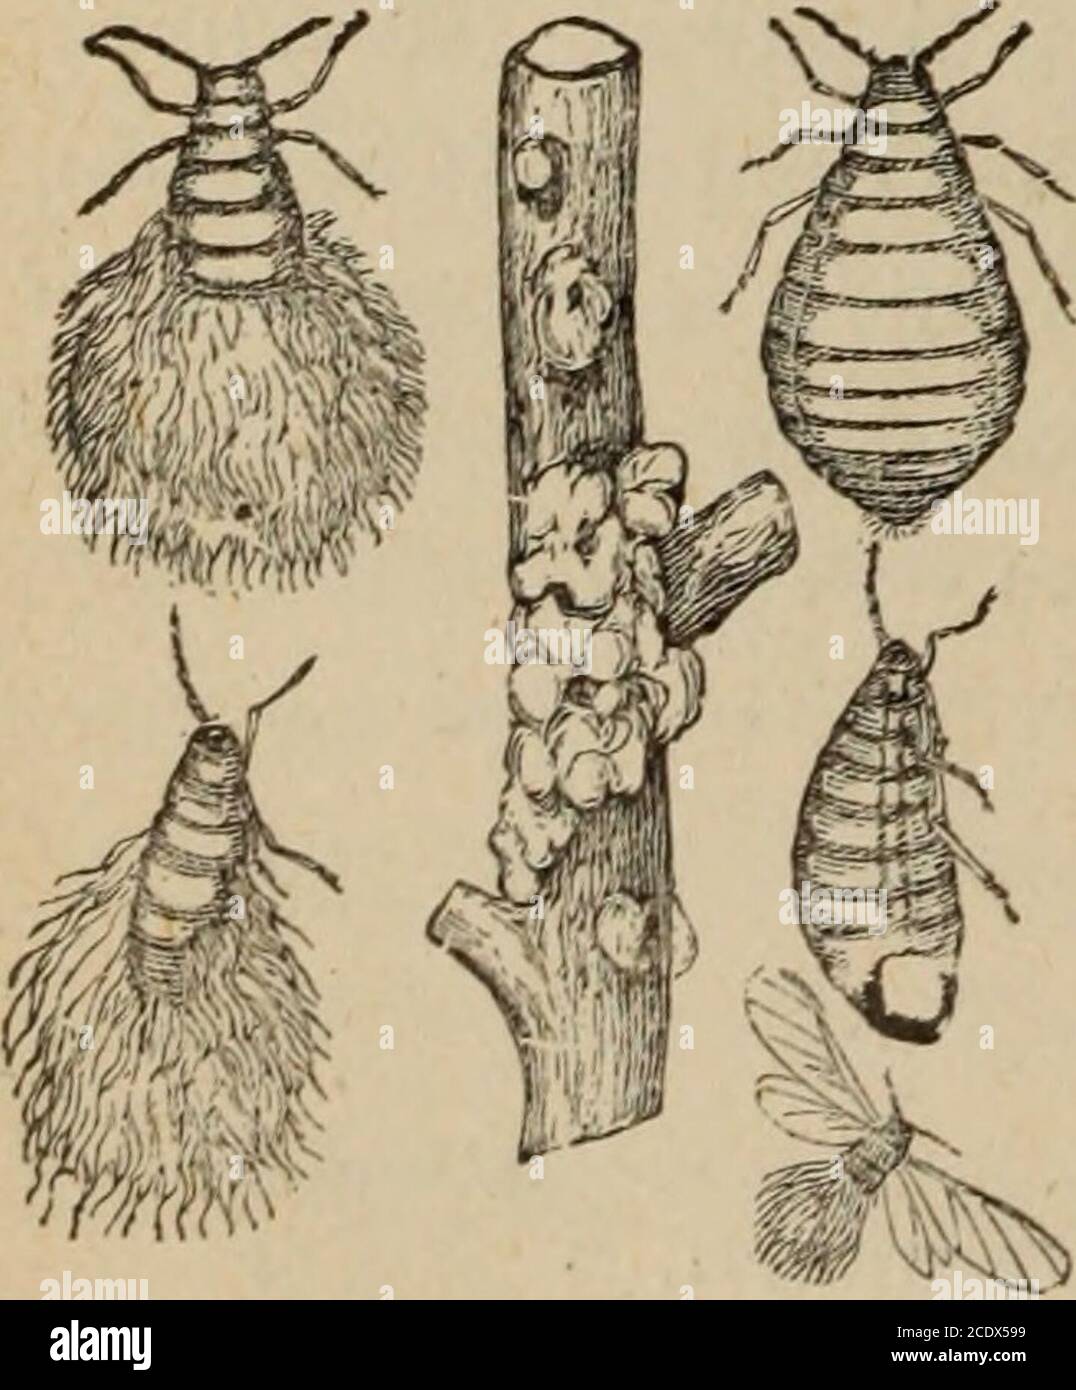 . Annual report of the Fruit Growers' Association of Ontario, 1902 . wders, liquids or gases that kill by contact or suffocation. It is also of importance that the fruit-grower learn to recognize the larvfe, for they areusually the most injurious stage of insect life. The young of moths and butterflies, usuallycalled caterpillars, are in most cases 16-legged, with the exception of the loopers which are10-legged. The grubs or worms of saw-flies are 20-legged. The young of beetles, or grubs,are usually 6-legged. The maggots of flies, bees and wasps are usually legless. The youngof grasshoppers, Stock Photo